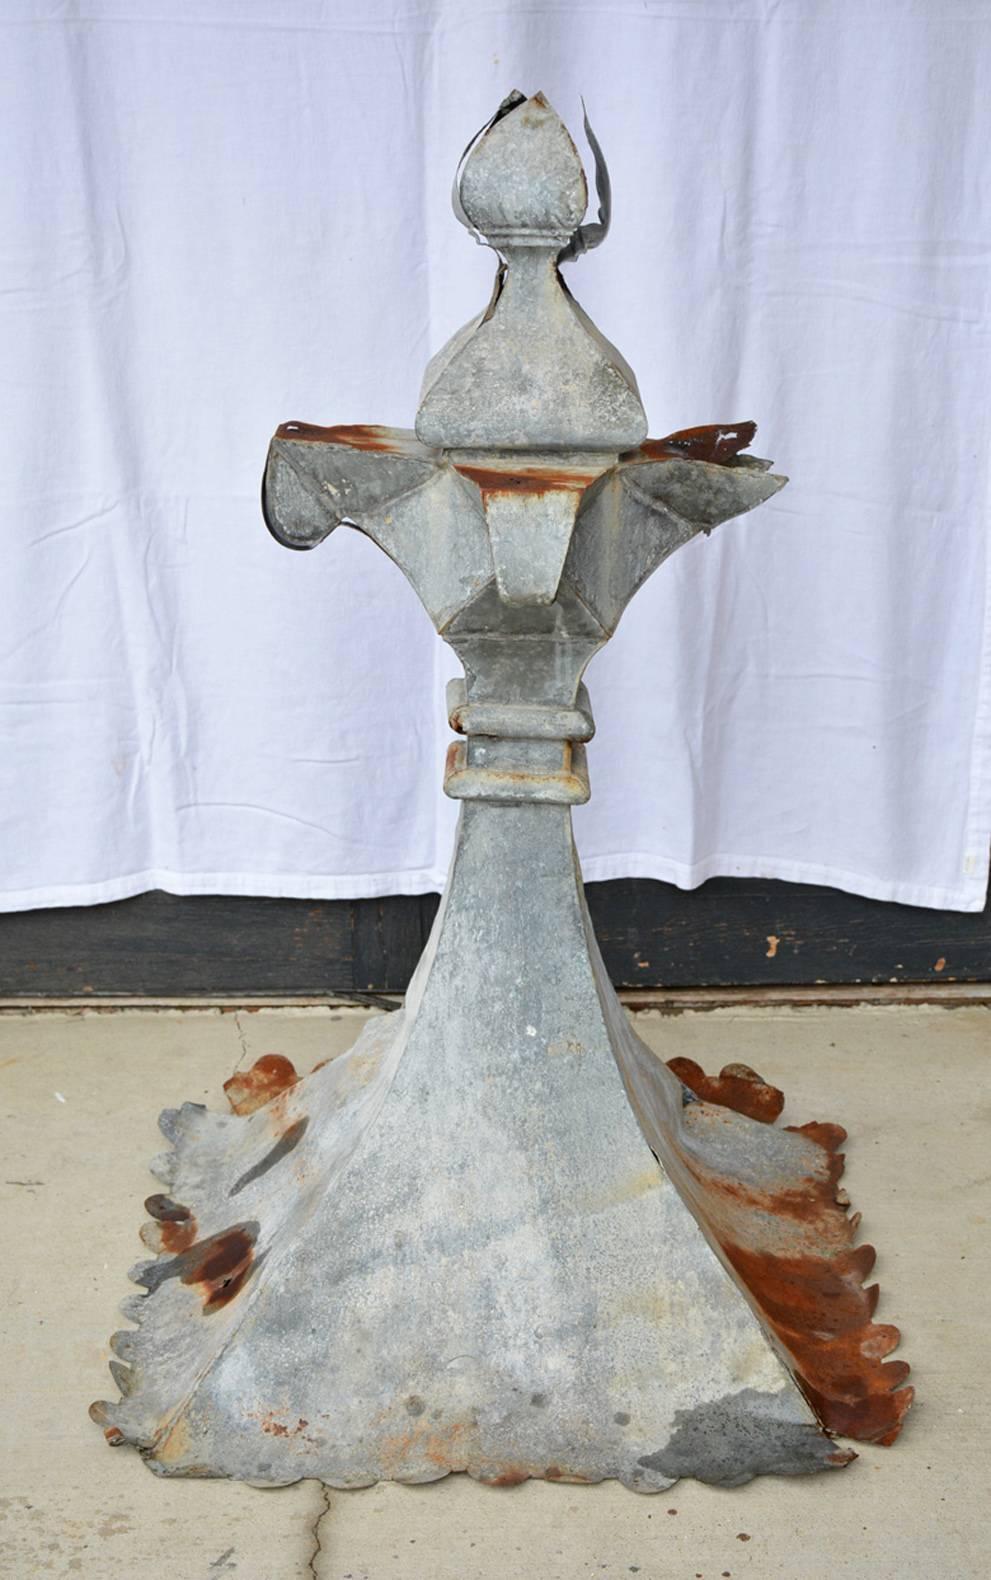 The antique zinc finial has small scallops around the bottom with holes for nails or screws when attaching to a building.